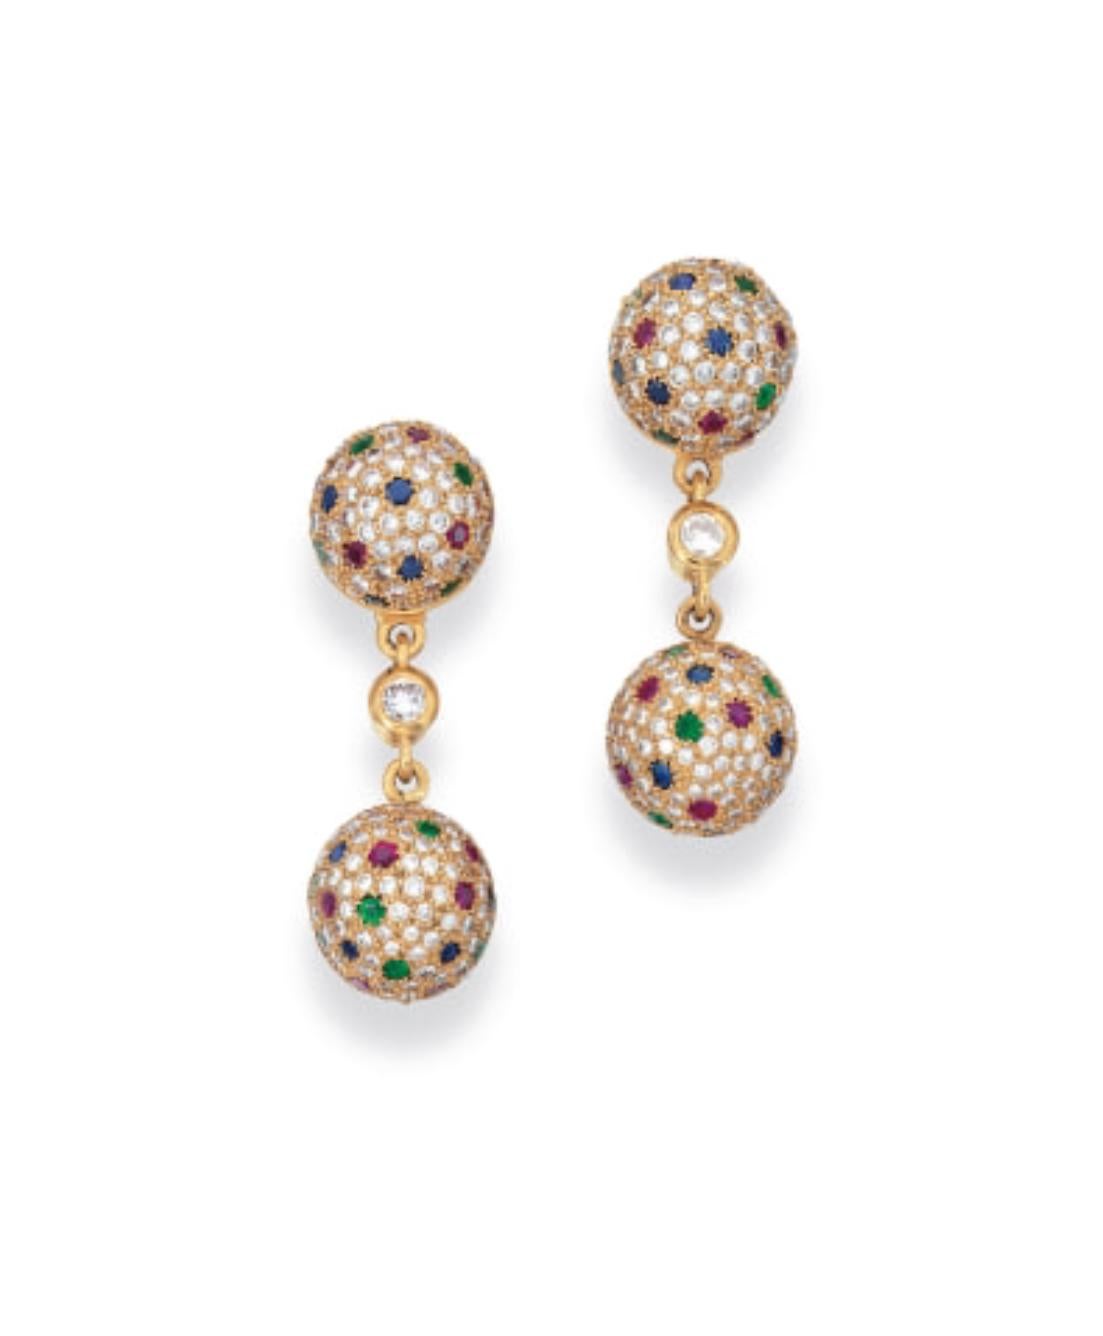 Round Cut Diamond Drop Earrings with Multi-Color Gemstones For Sale